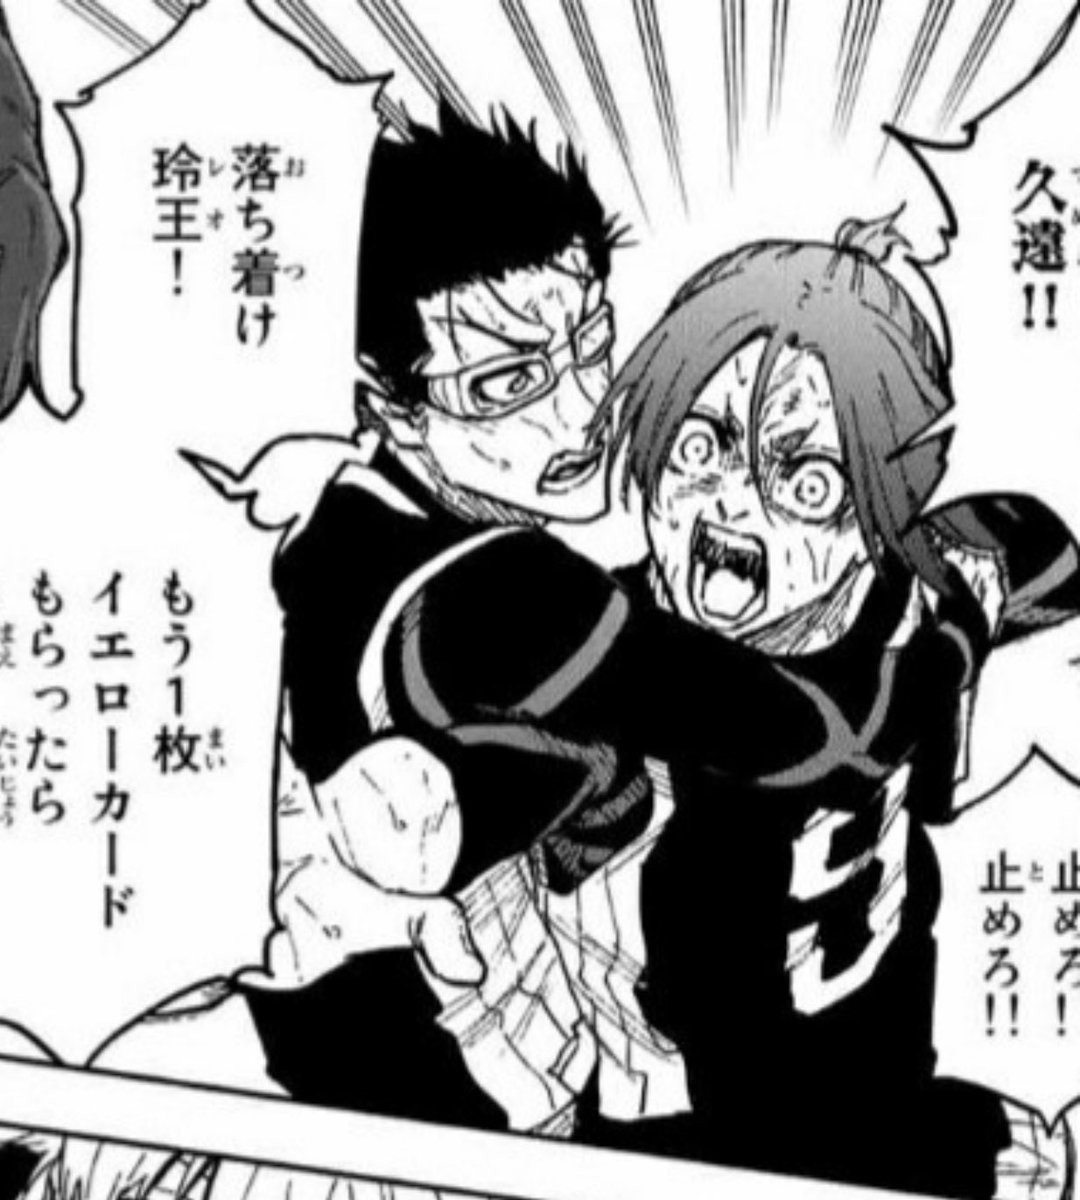 reonagi getting mad for each other man they go hard 